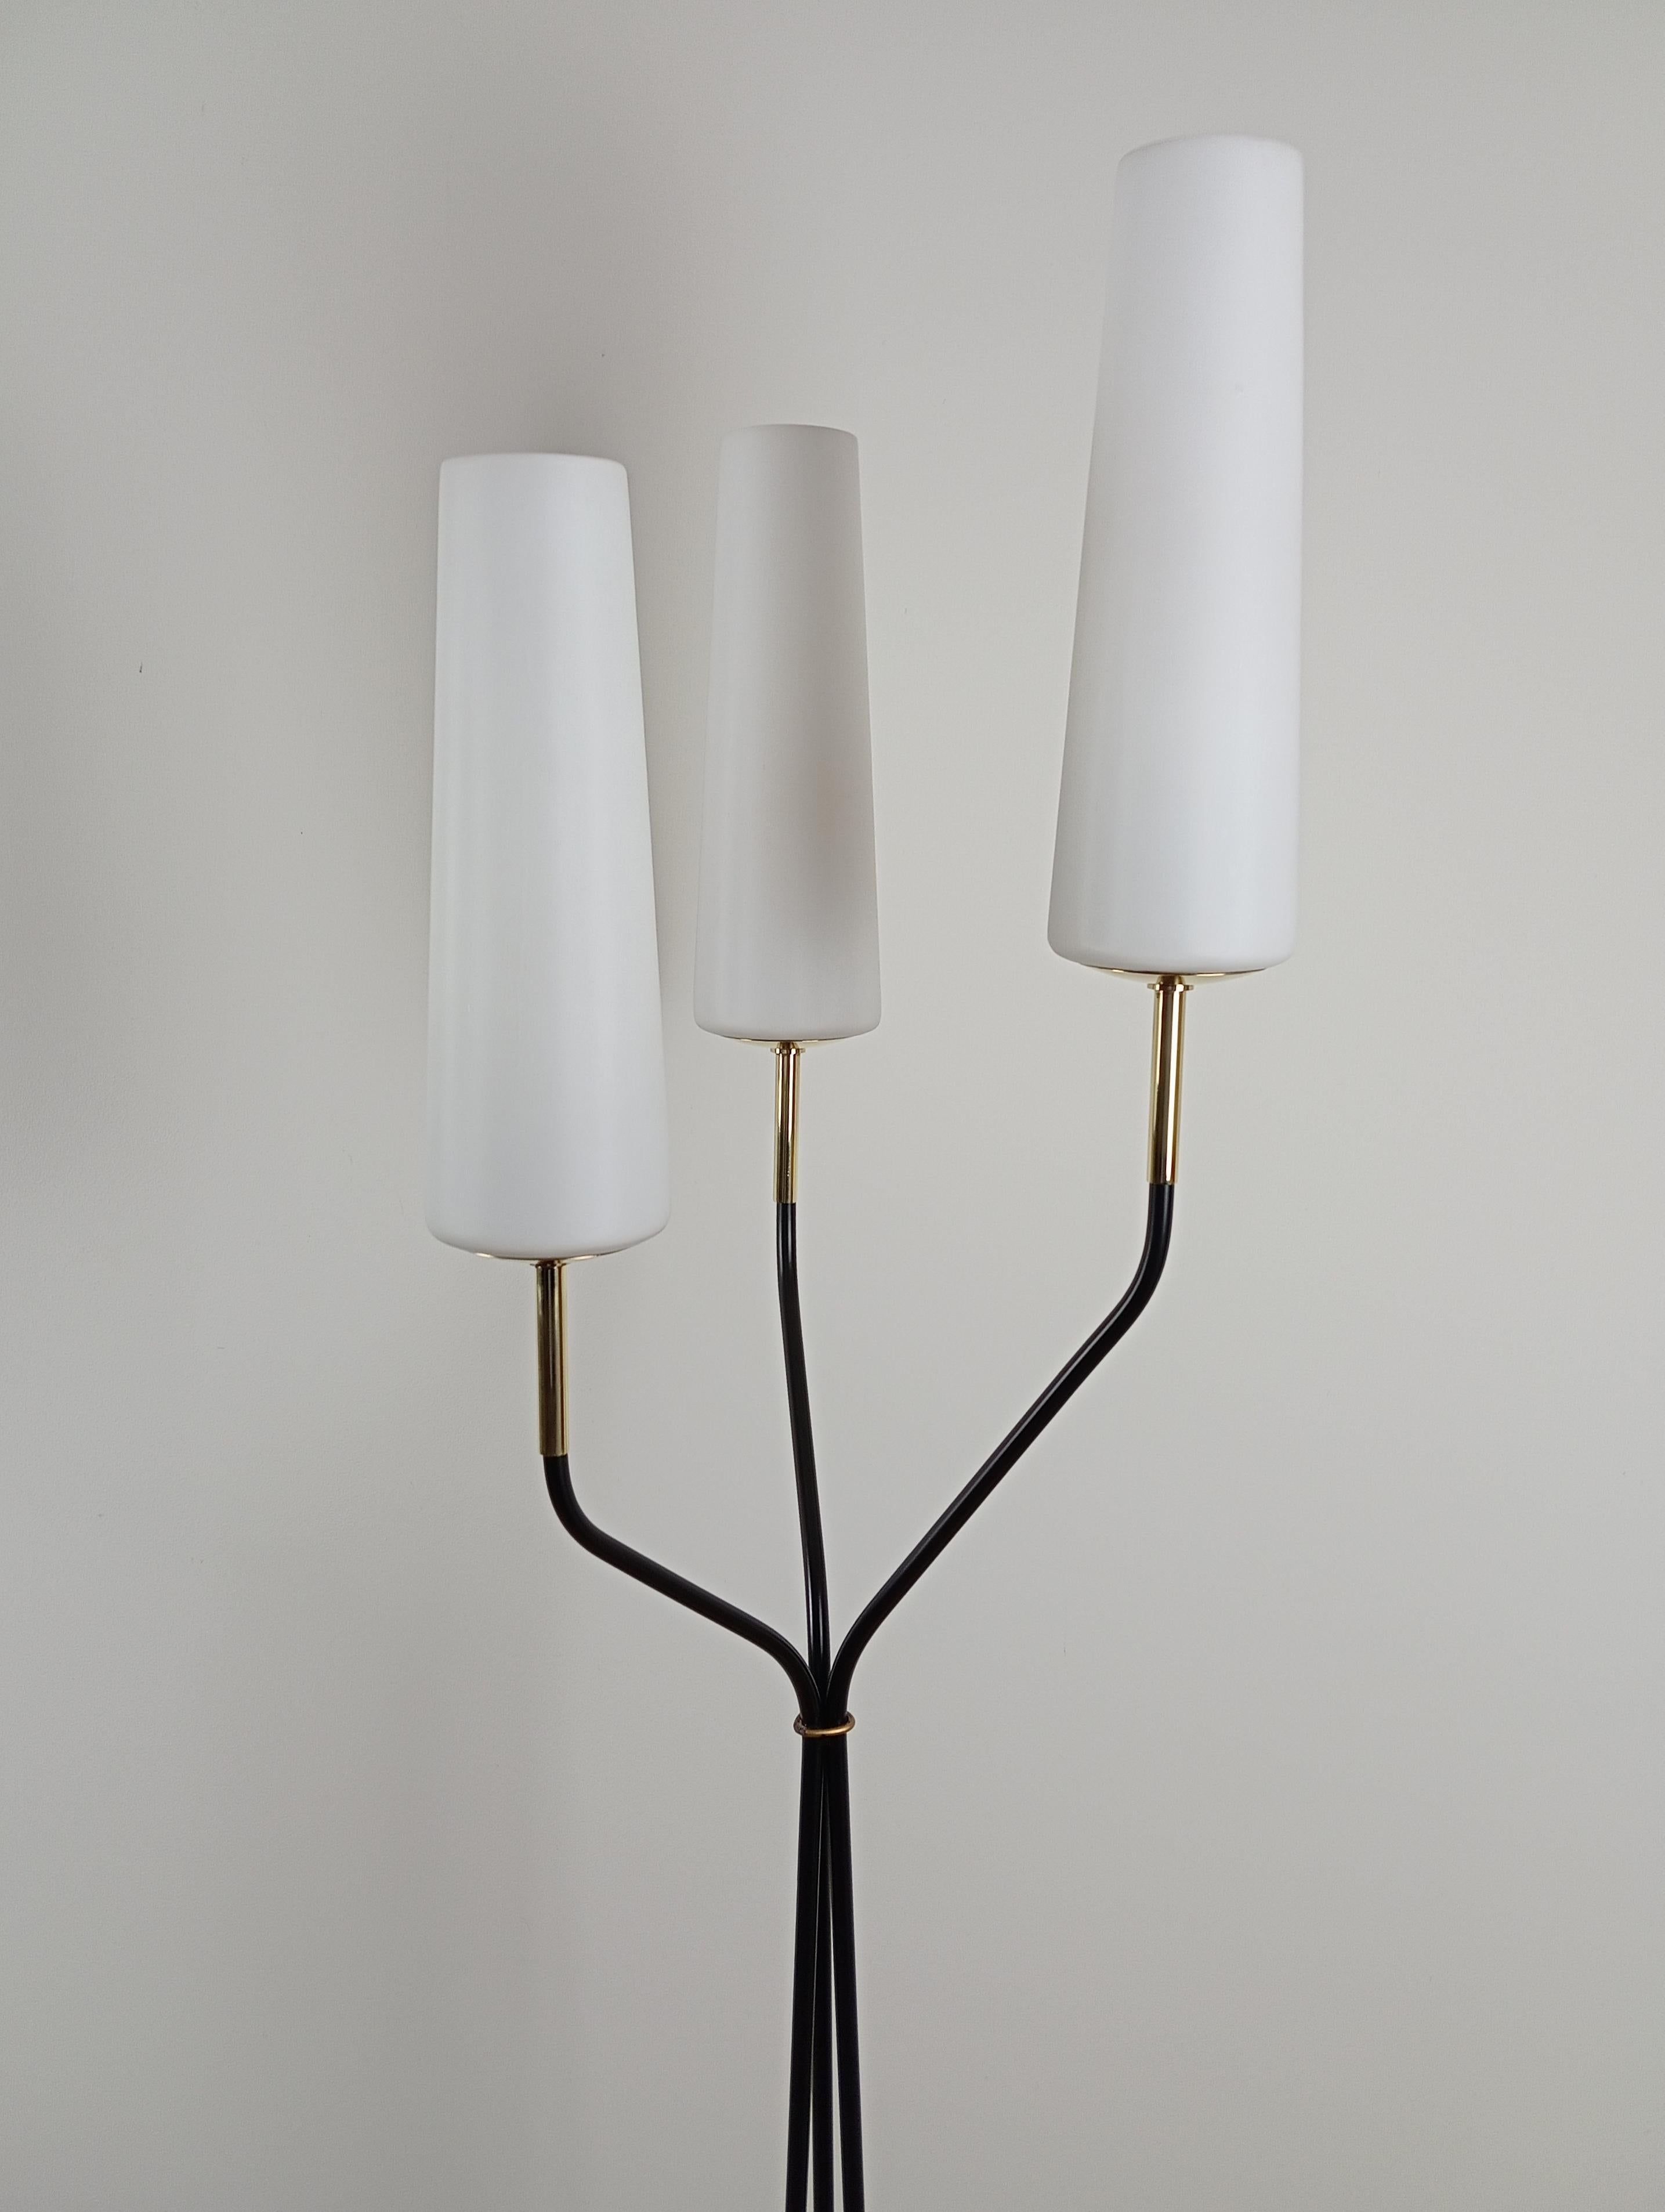 French Floor lamp with 3 light arms, Maison Lunel circa 1950 For Sale